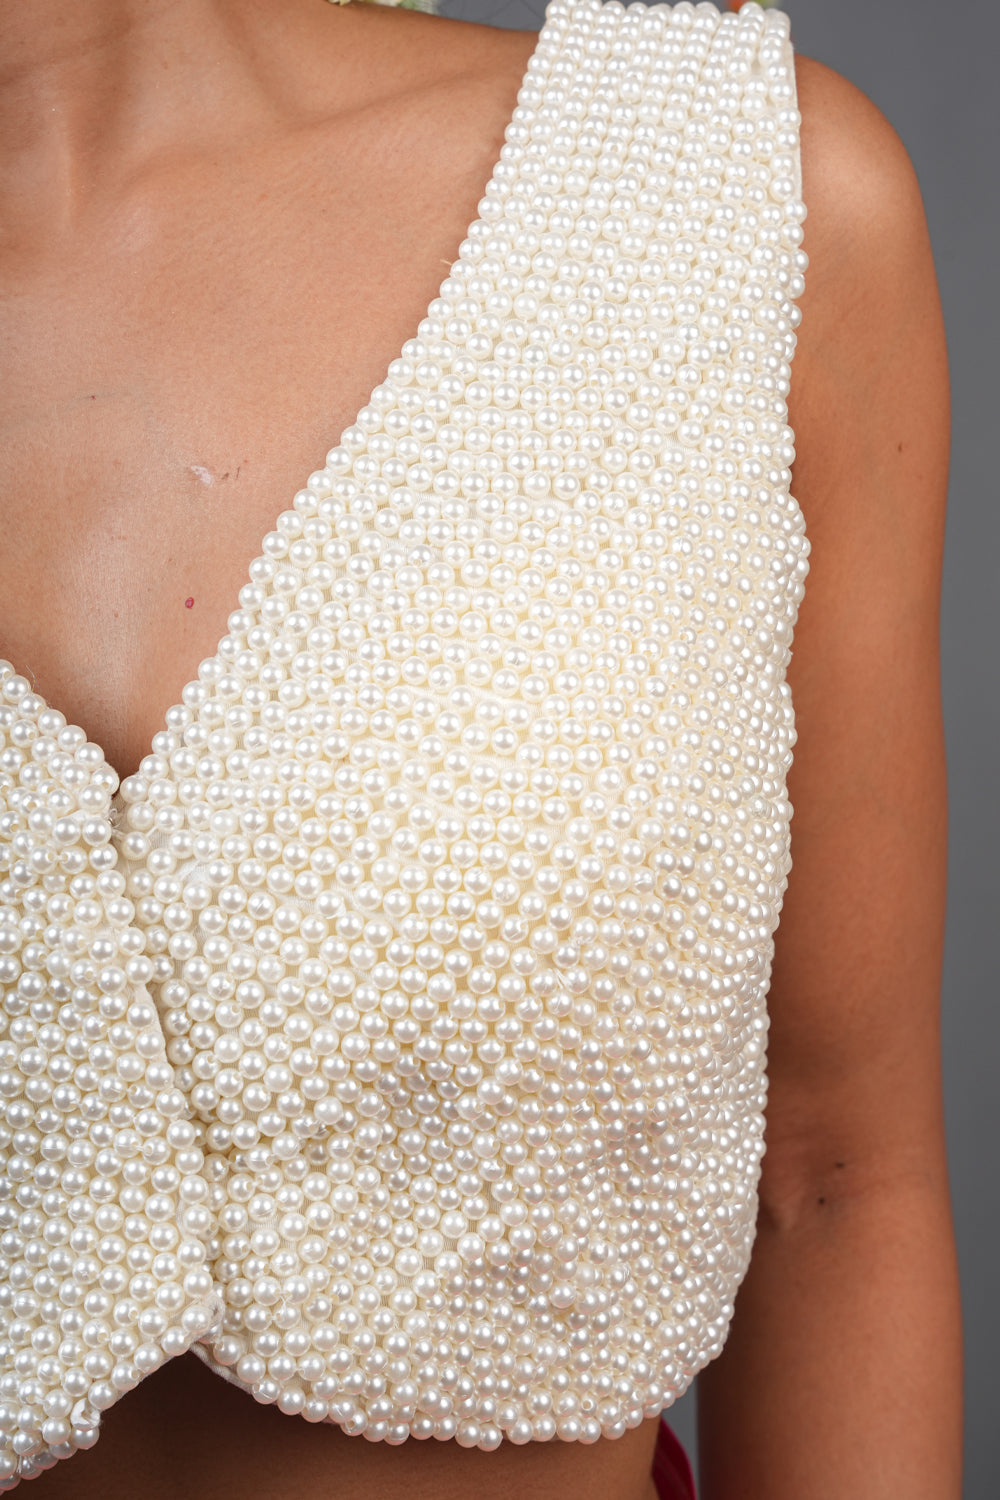 Embedded beads sleeveless blouse with multiple beads strands in back.